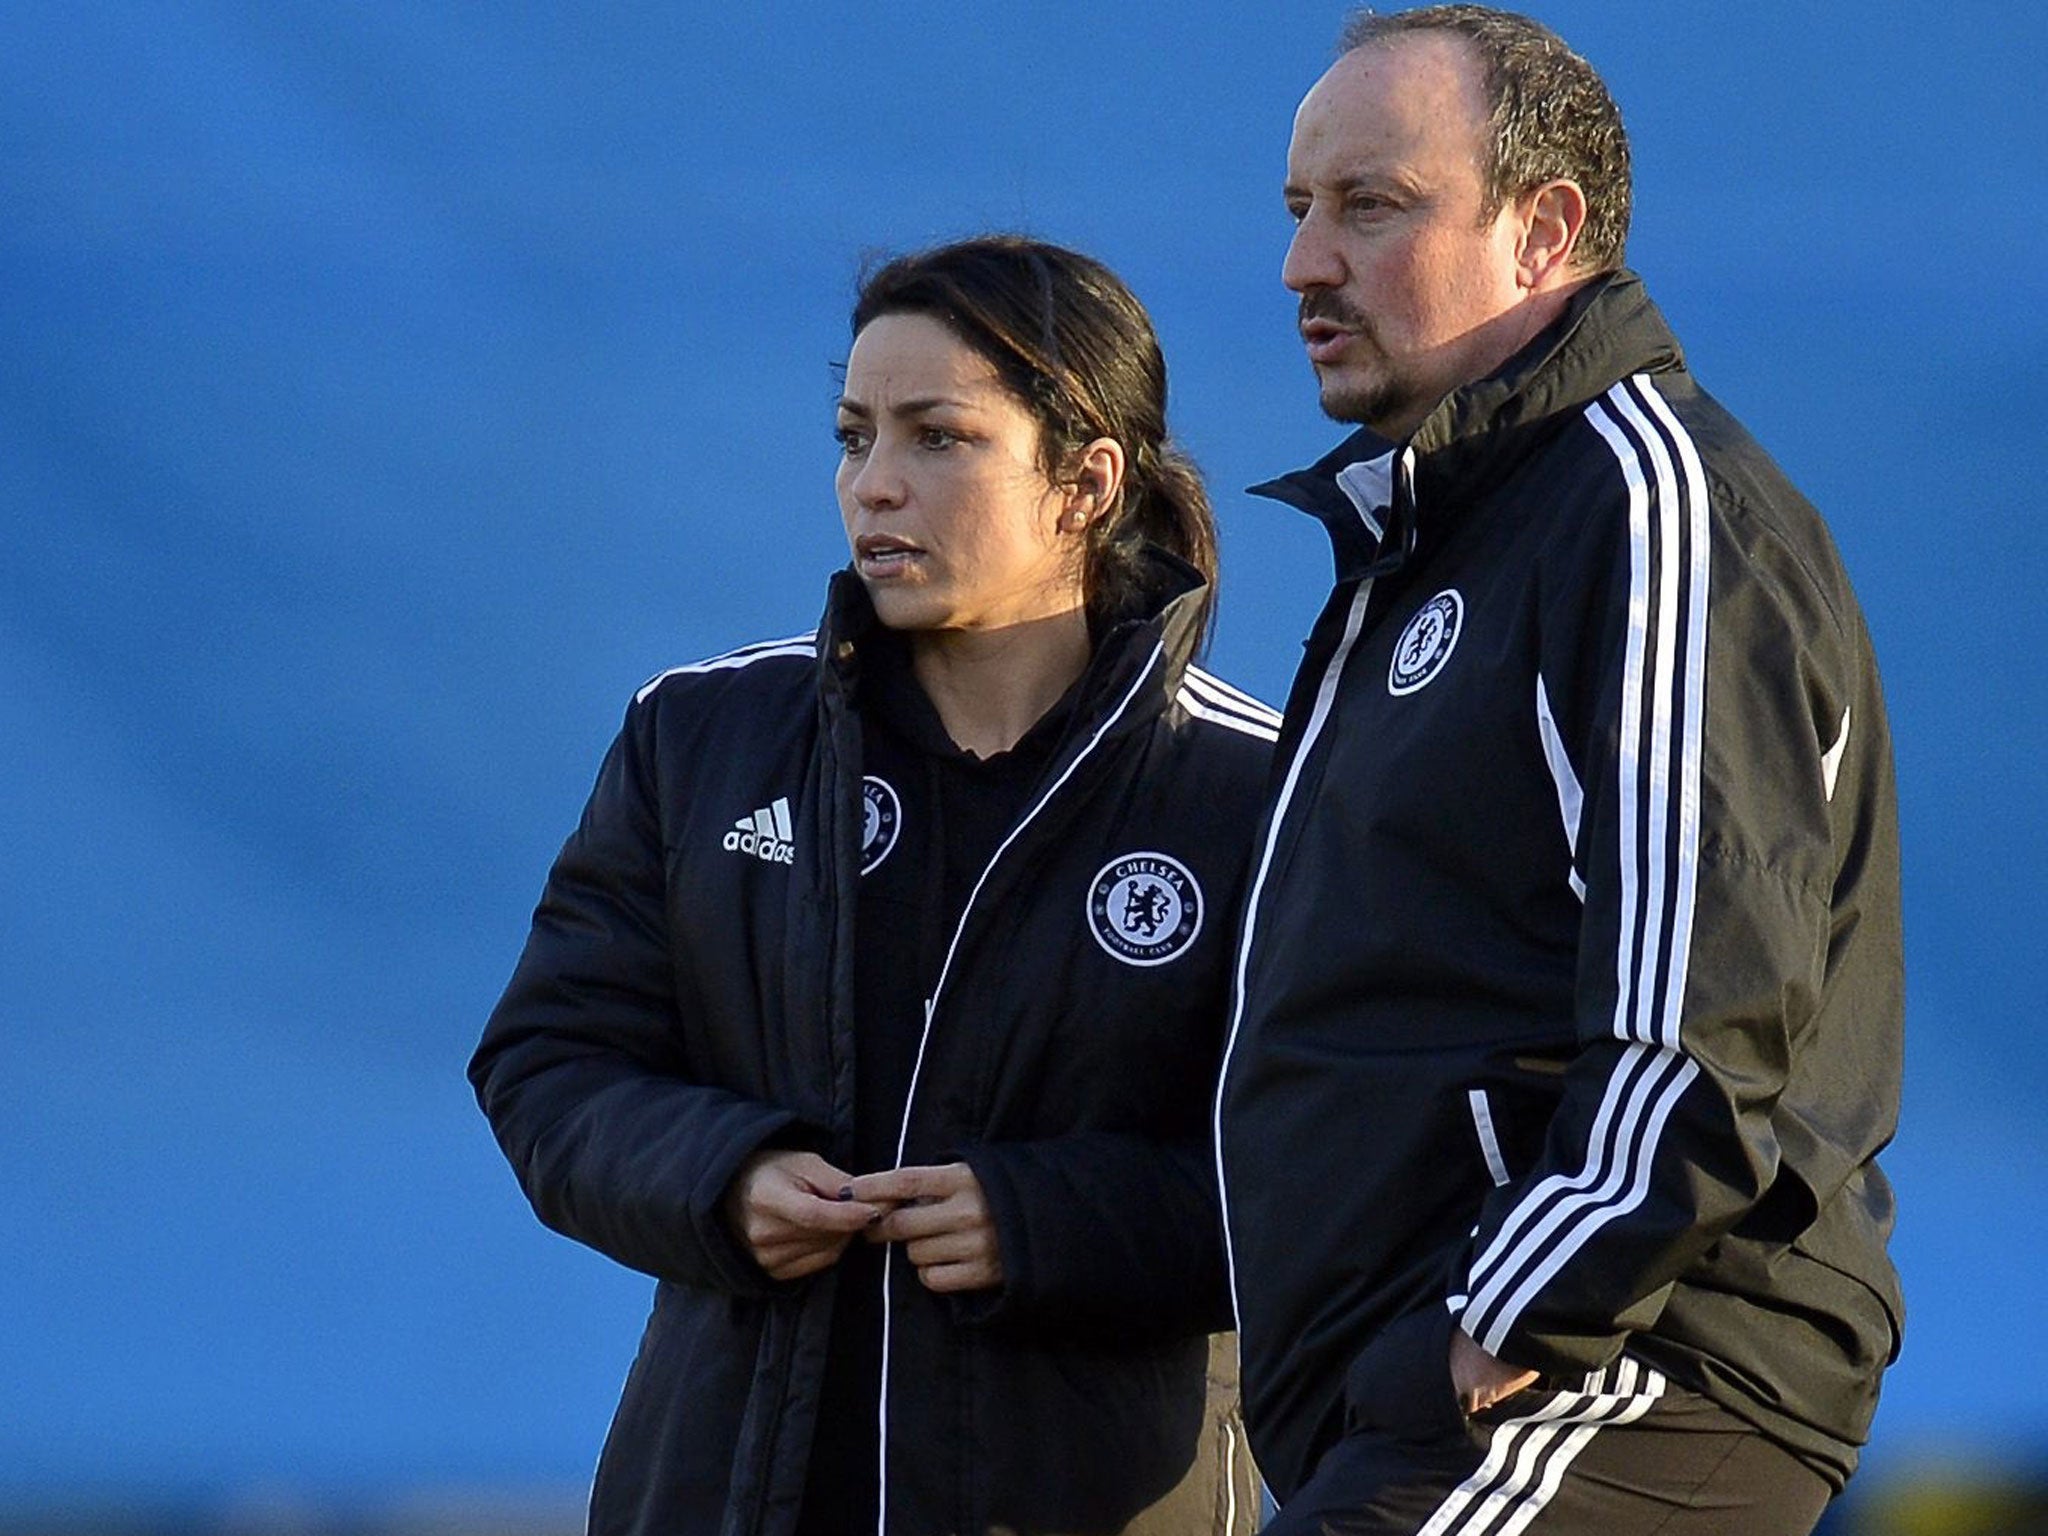 Rafa Benitez, who watched training with club doctor Eva Carneiro, must decide who will play in today’s final